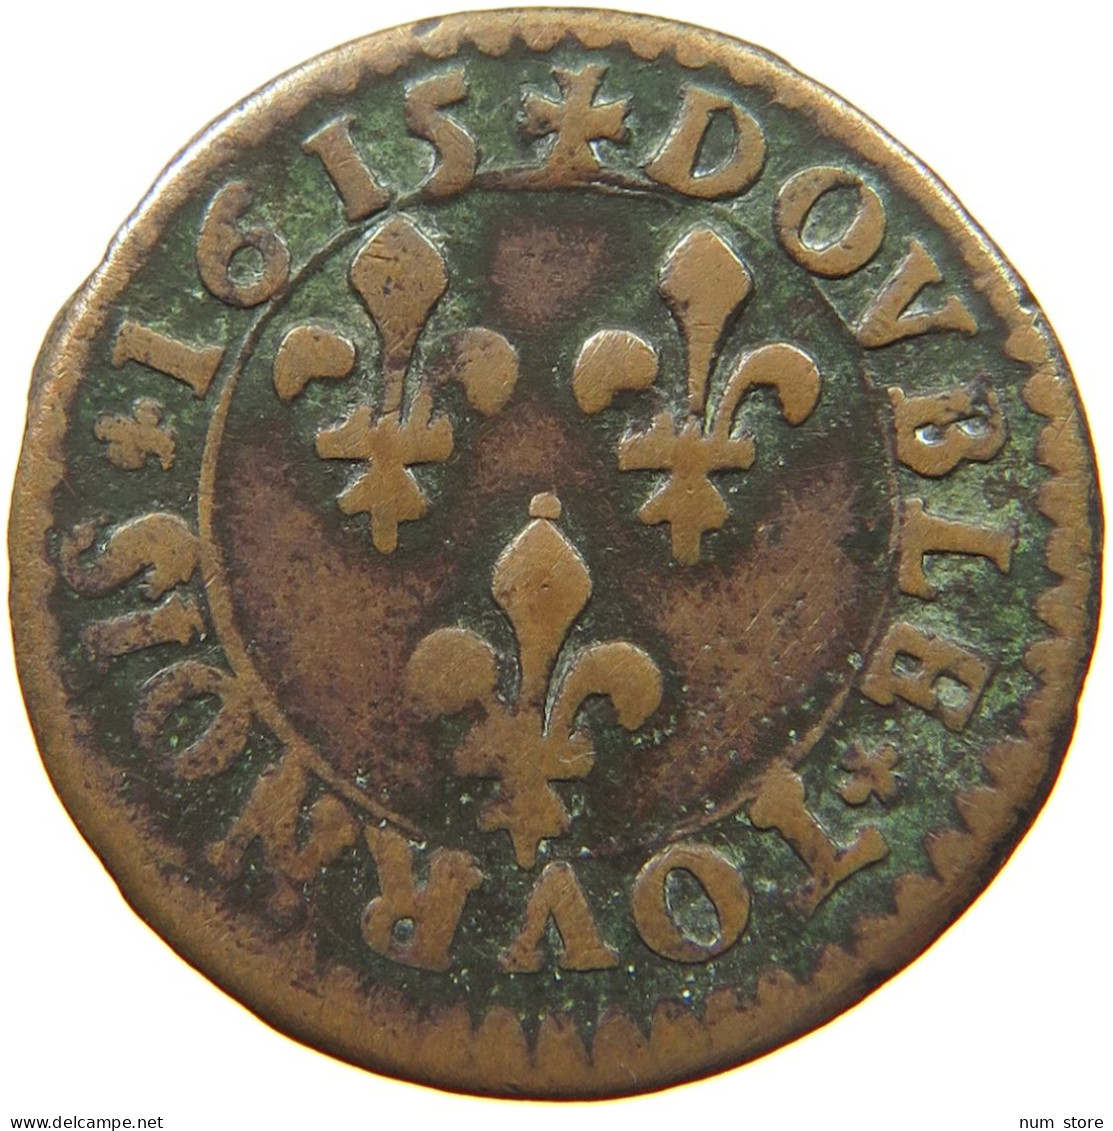 FRANCE DOUBLE TOURNOIS 1615 LOUIS XIII #MA 001665 - 1610-1643 Louis XIII The Just